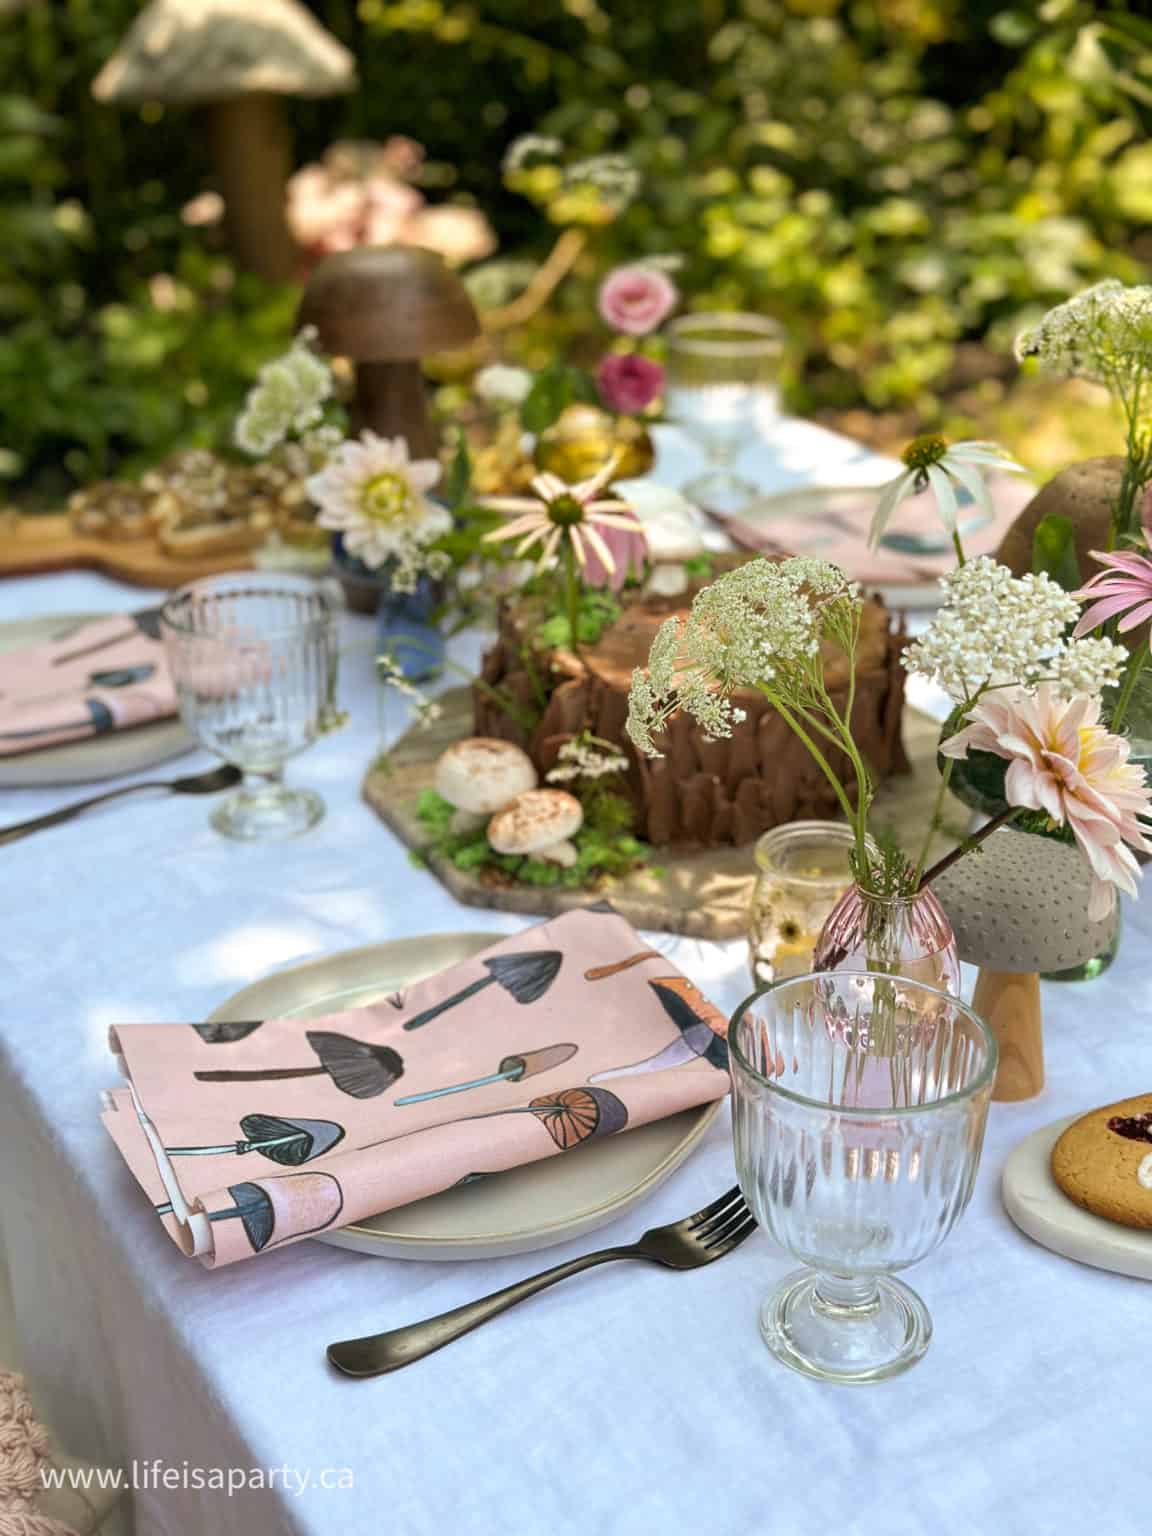 Mushroom Themed Picnic Party - Life is a Party